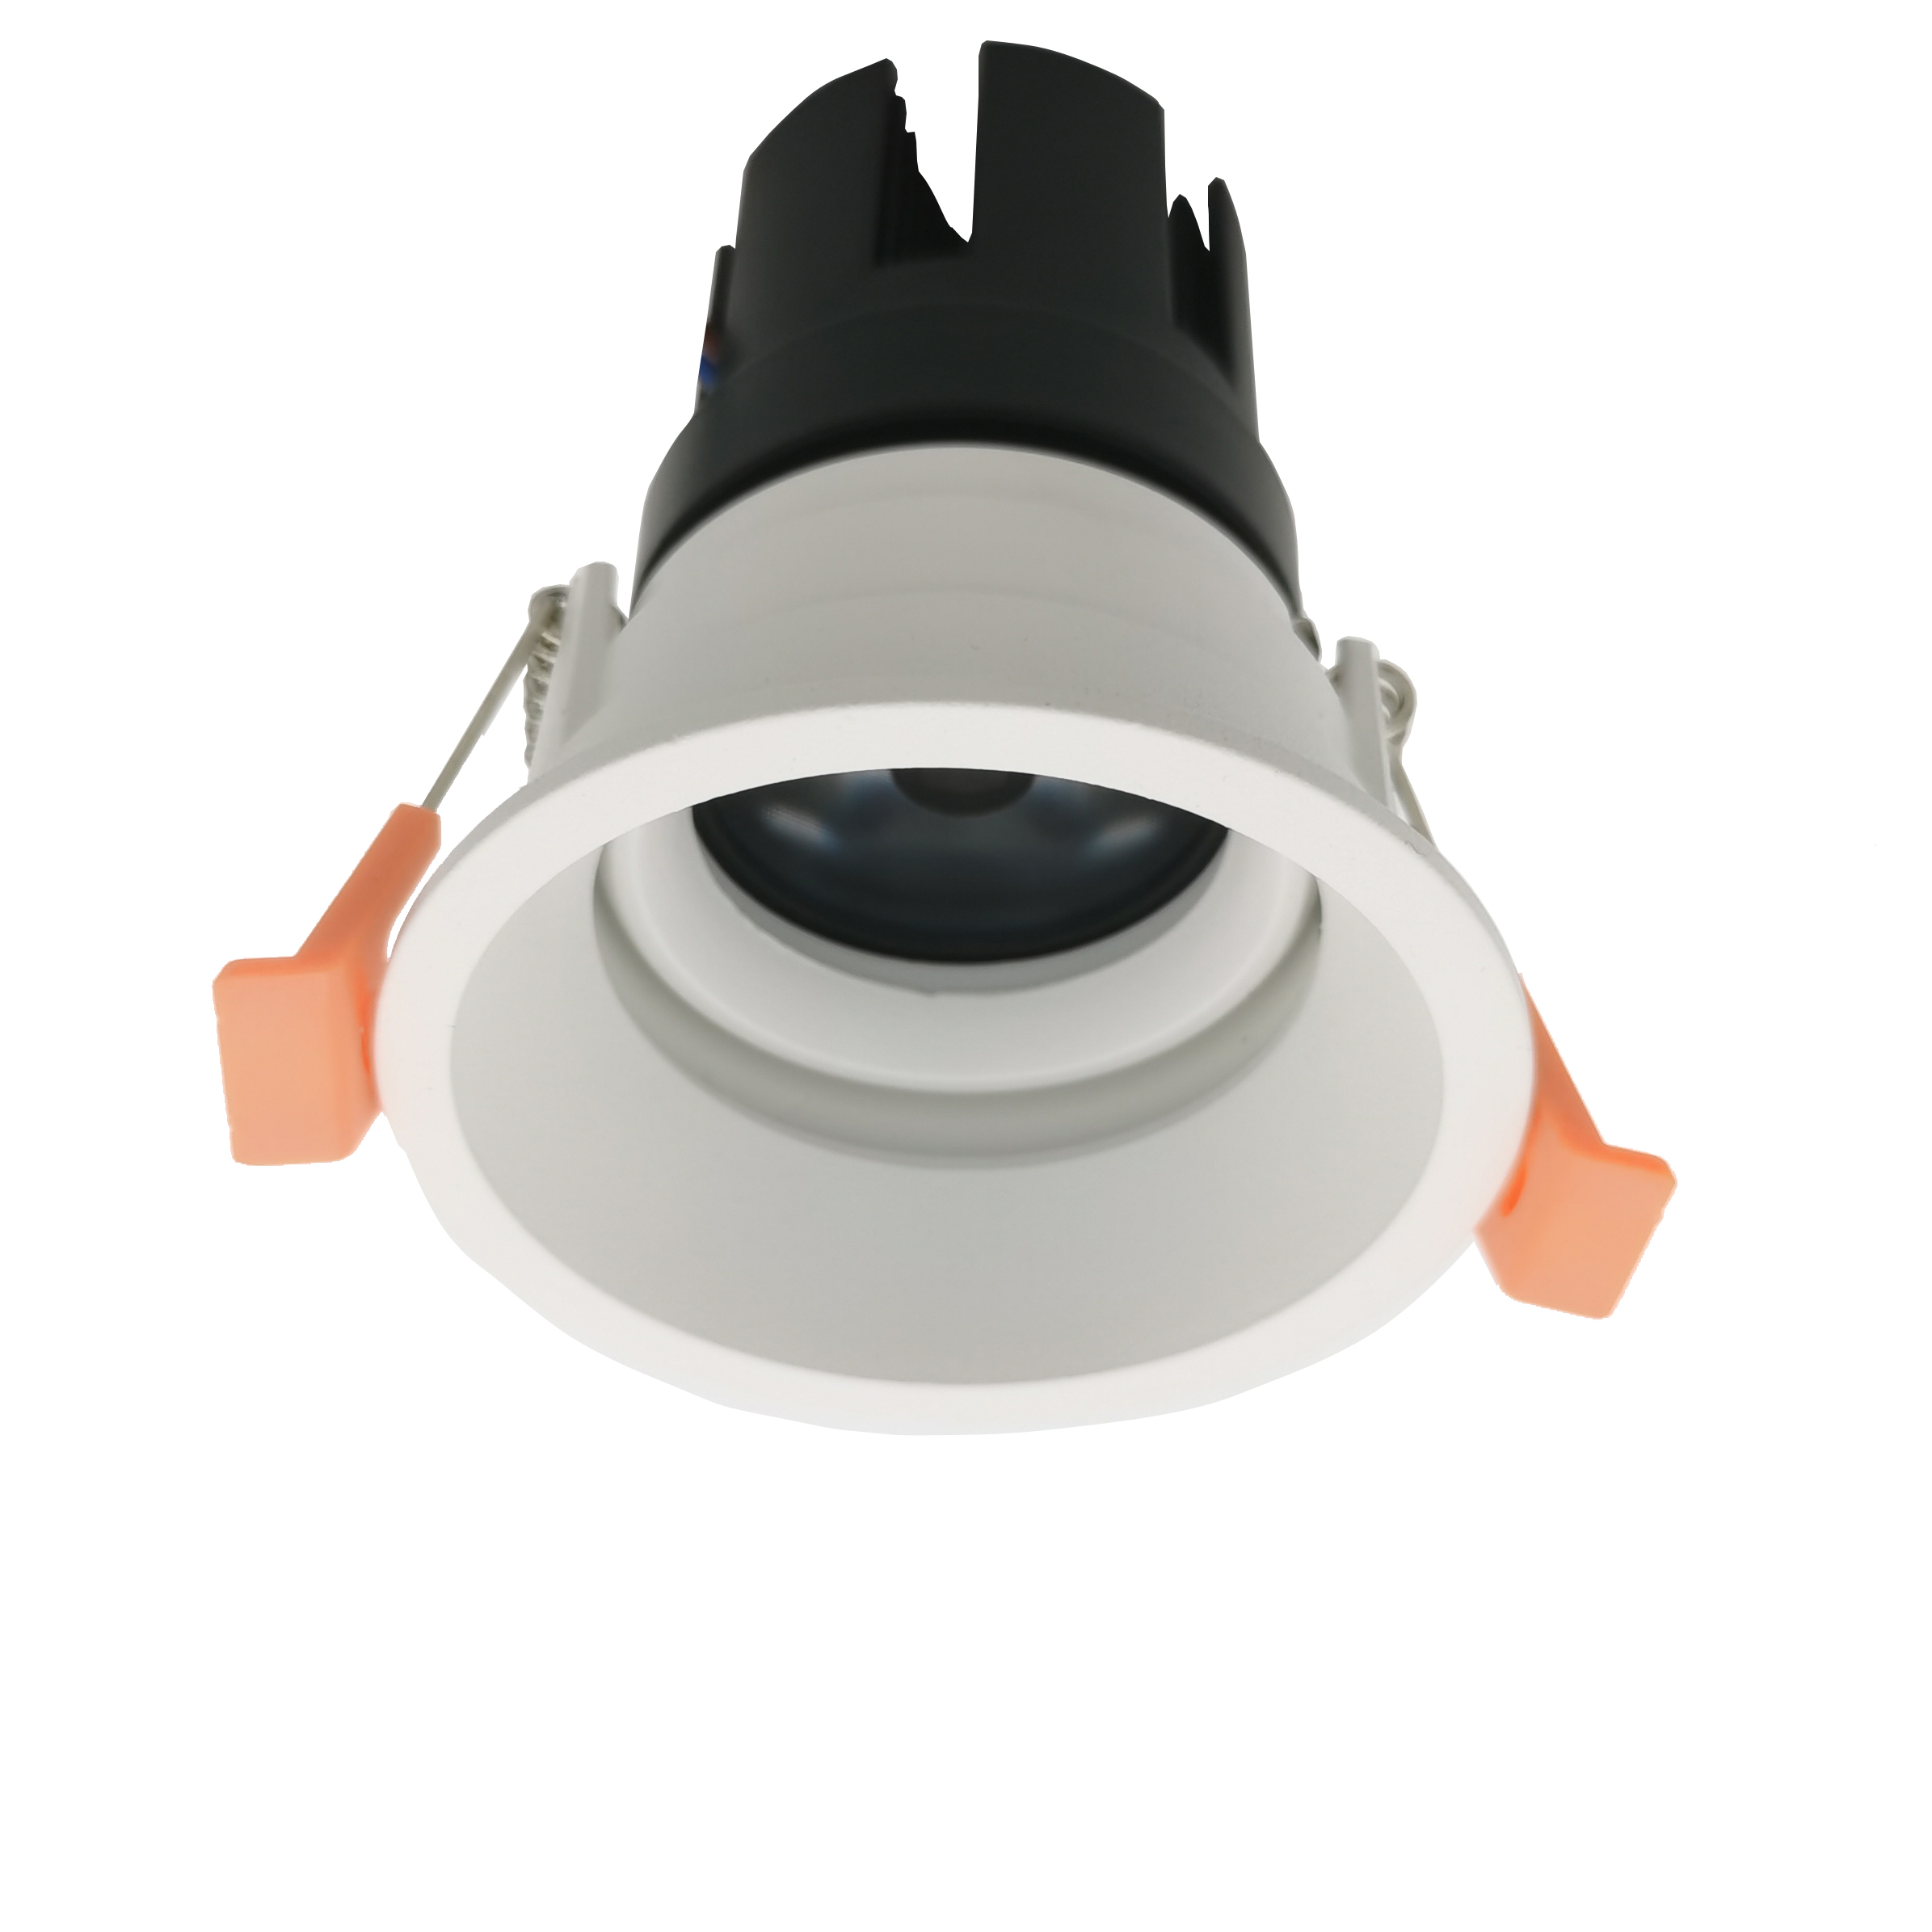 Outcut 75mm Anti-glare 7W 12W 15W 20W LED Daylight Recessed Lighting LED Down Light adjustable LED Downlight